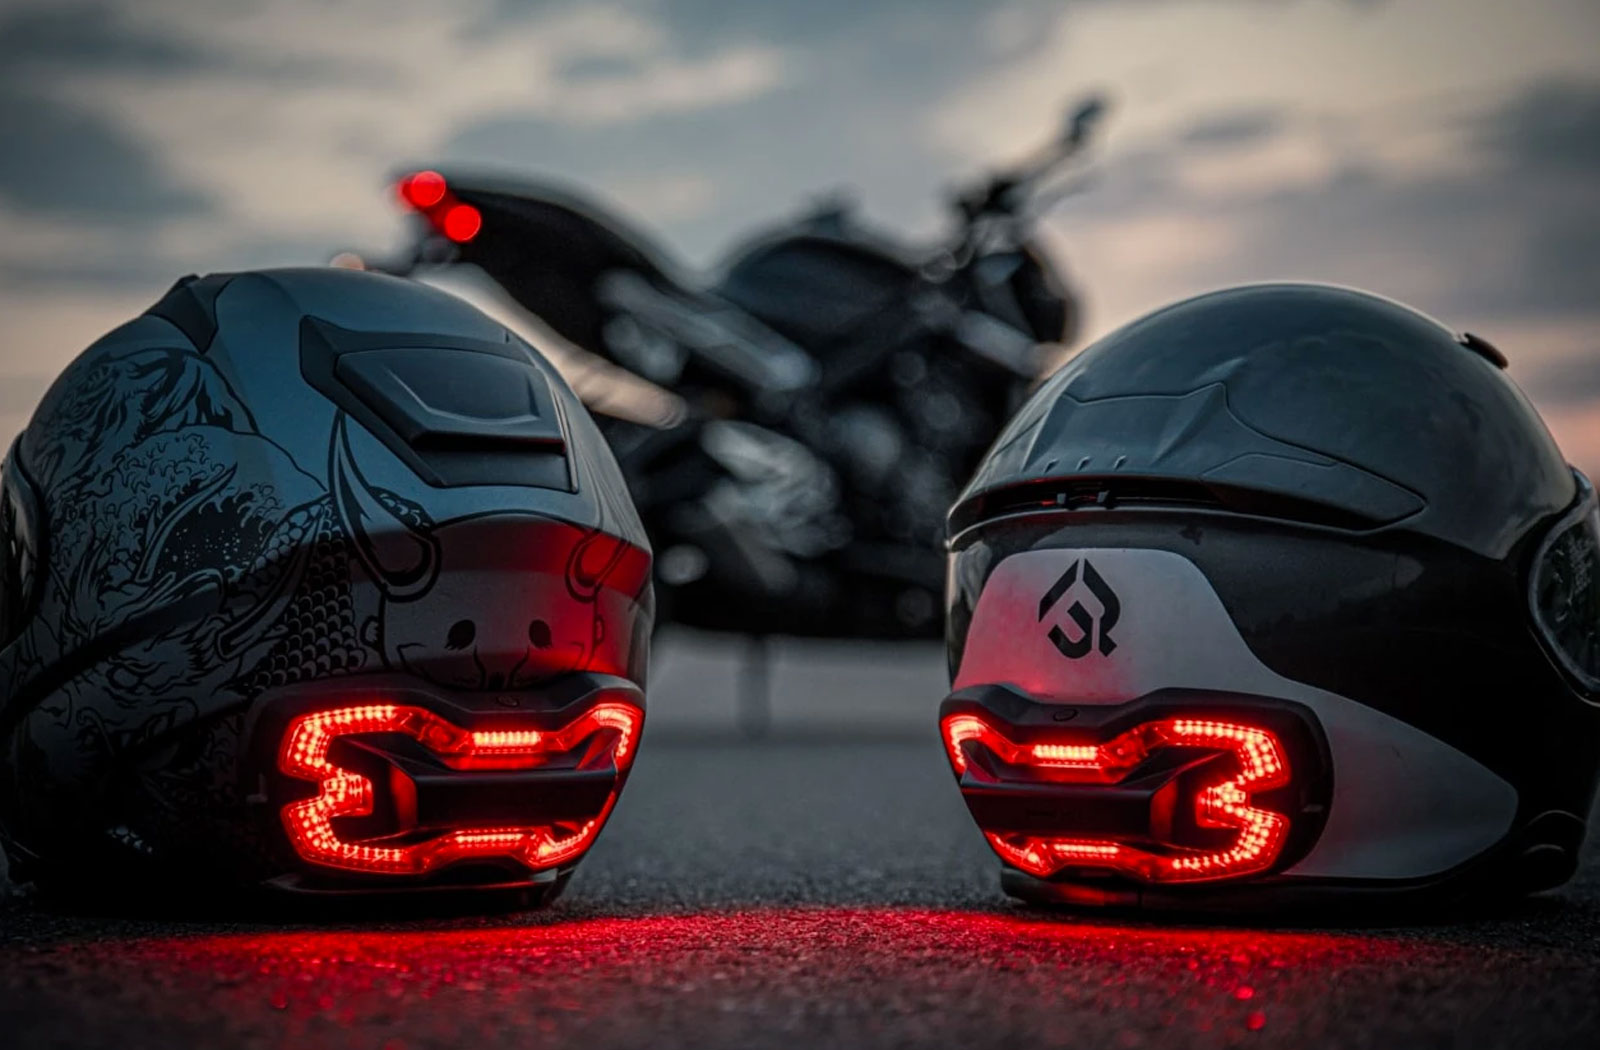 The best motorcycle accessories (and the worst!)